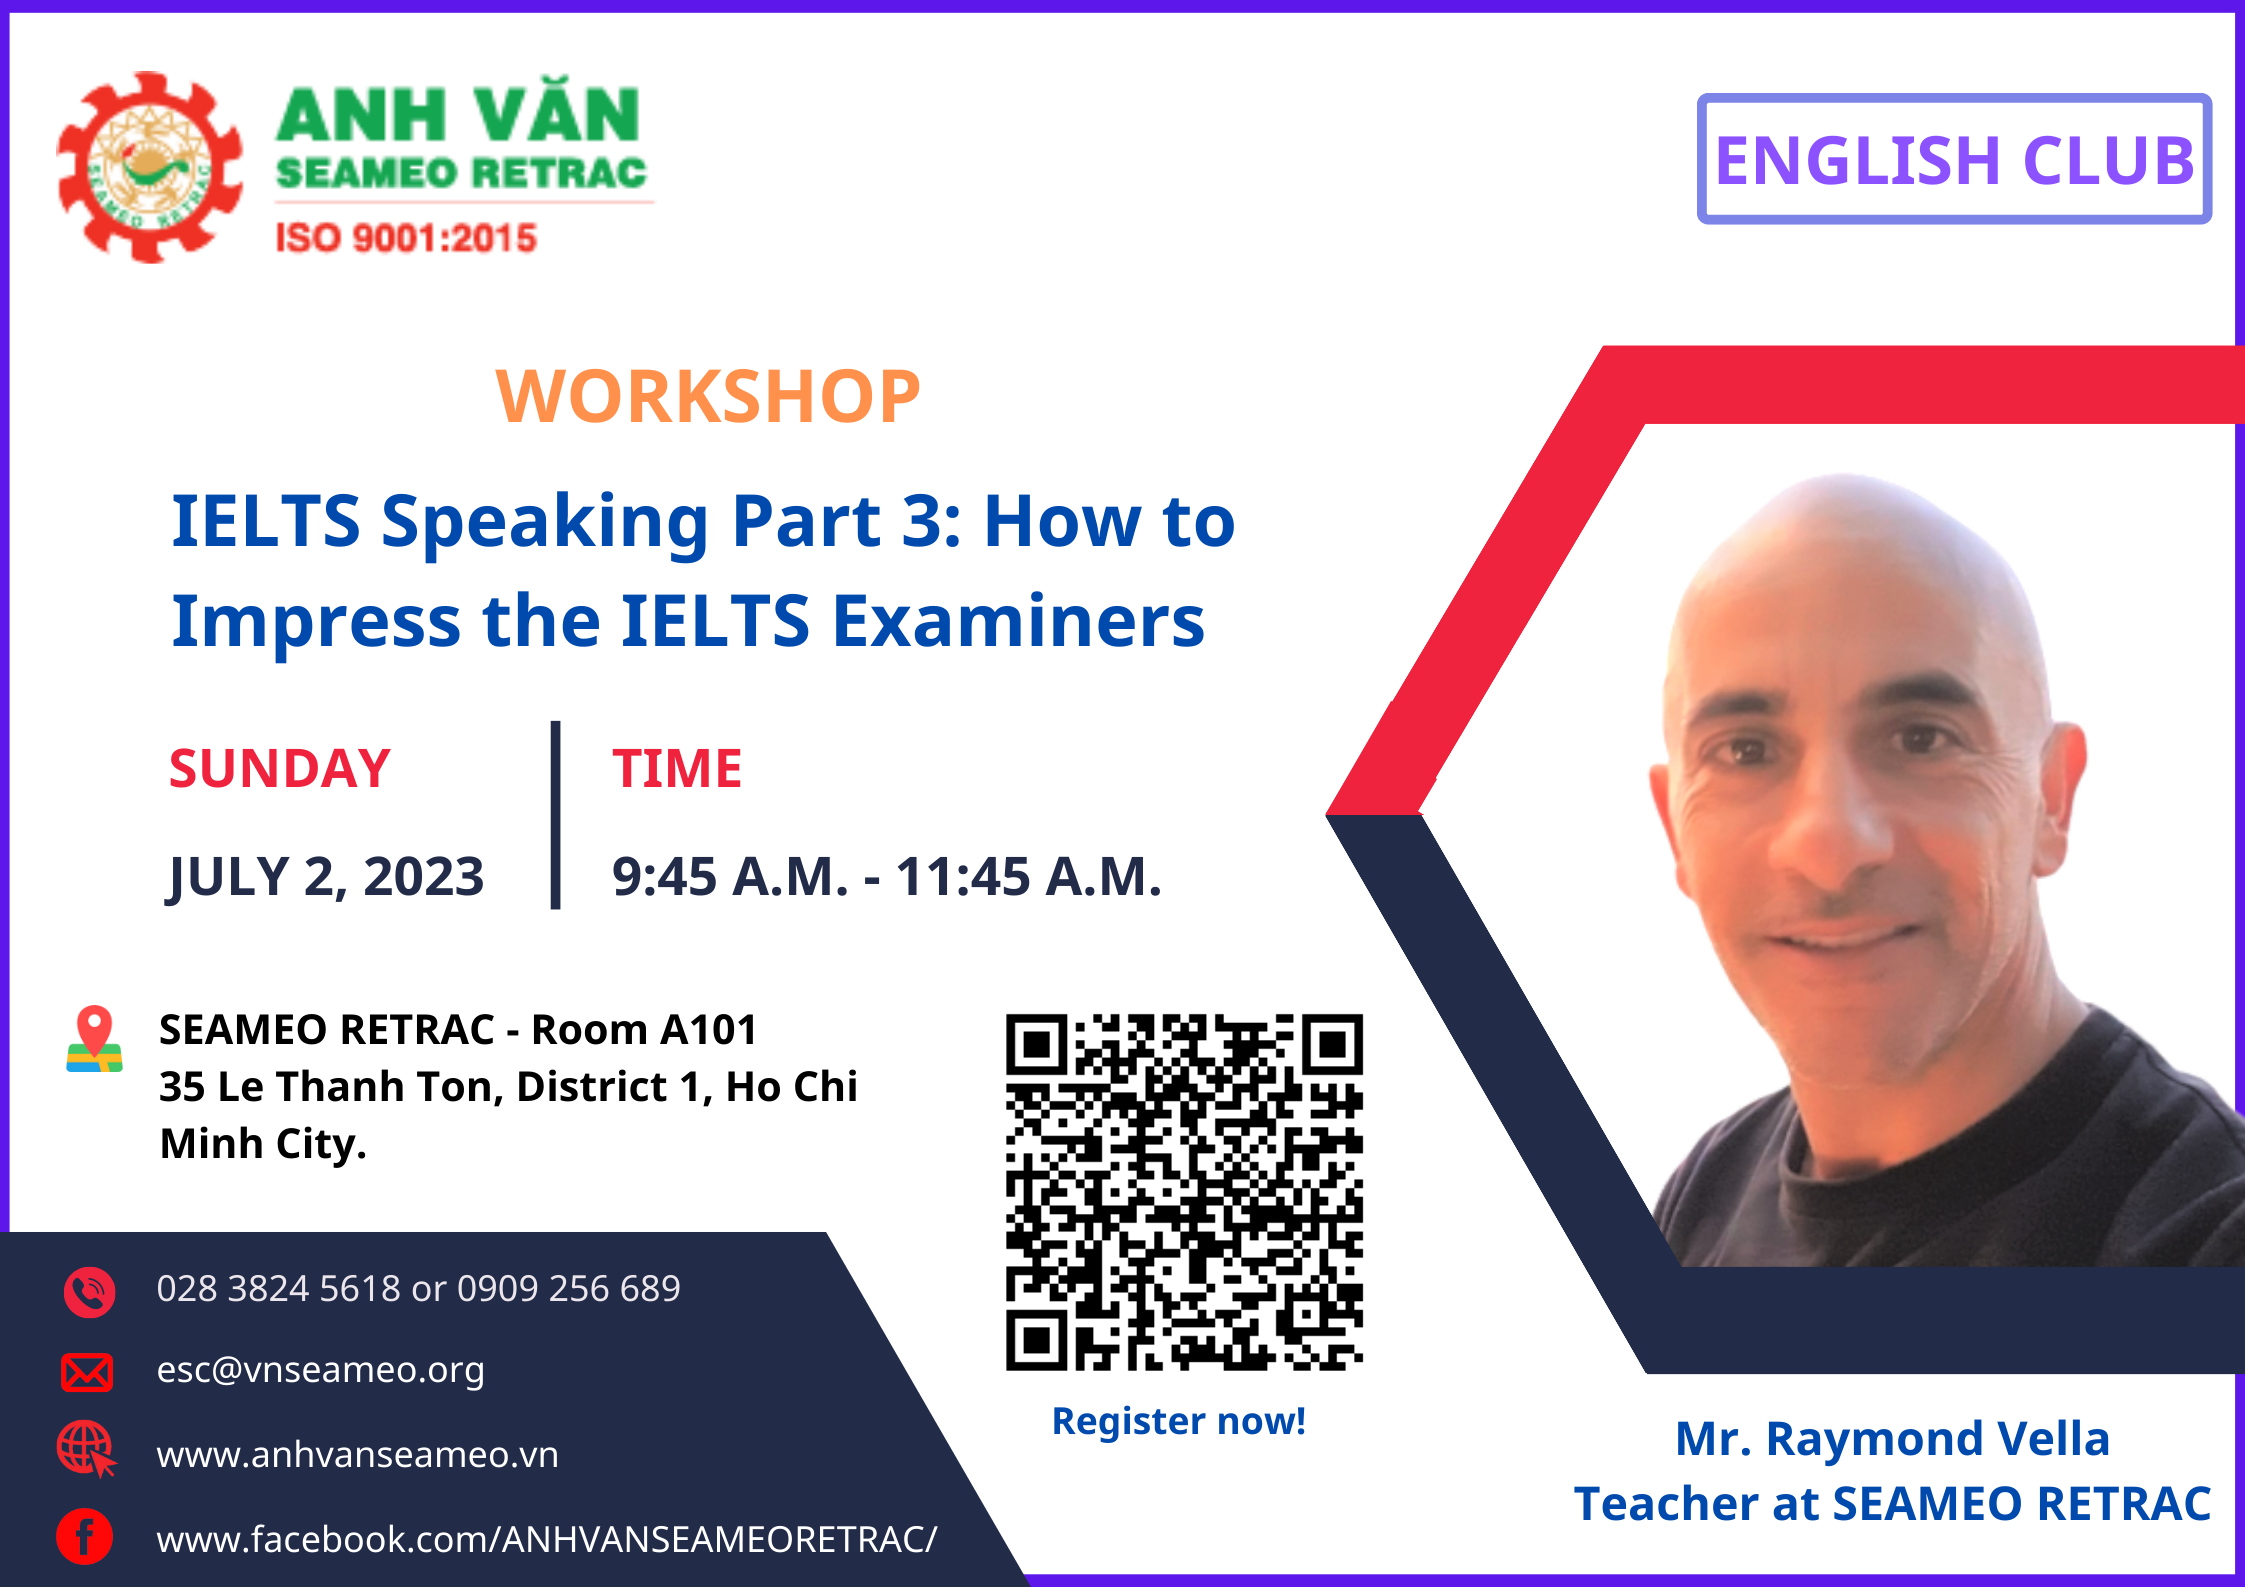 Buổi chia sẻ với chủ đề “IELTS Speaking Part 3: How to Impress the IELTS Examiners”